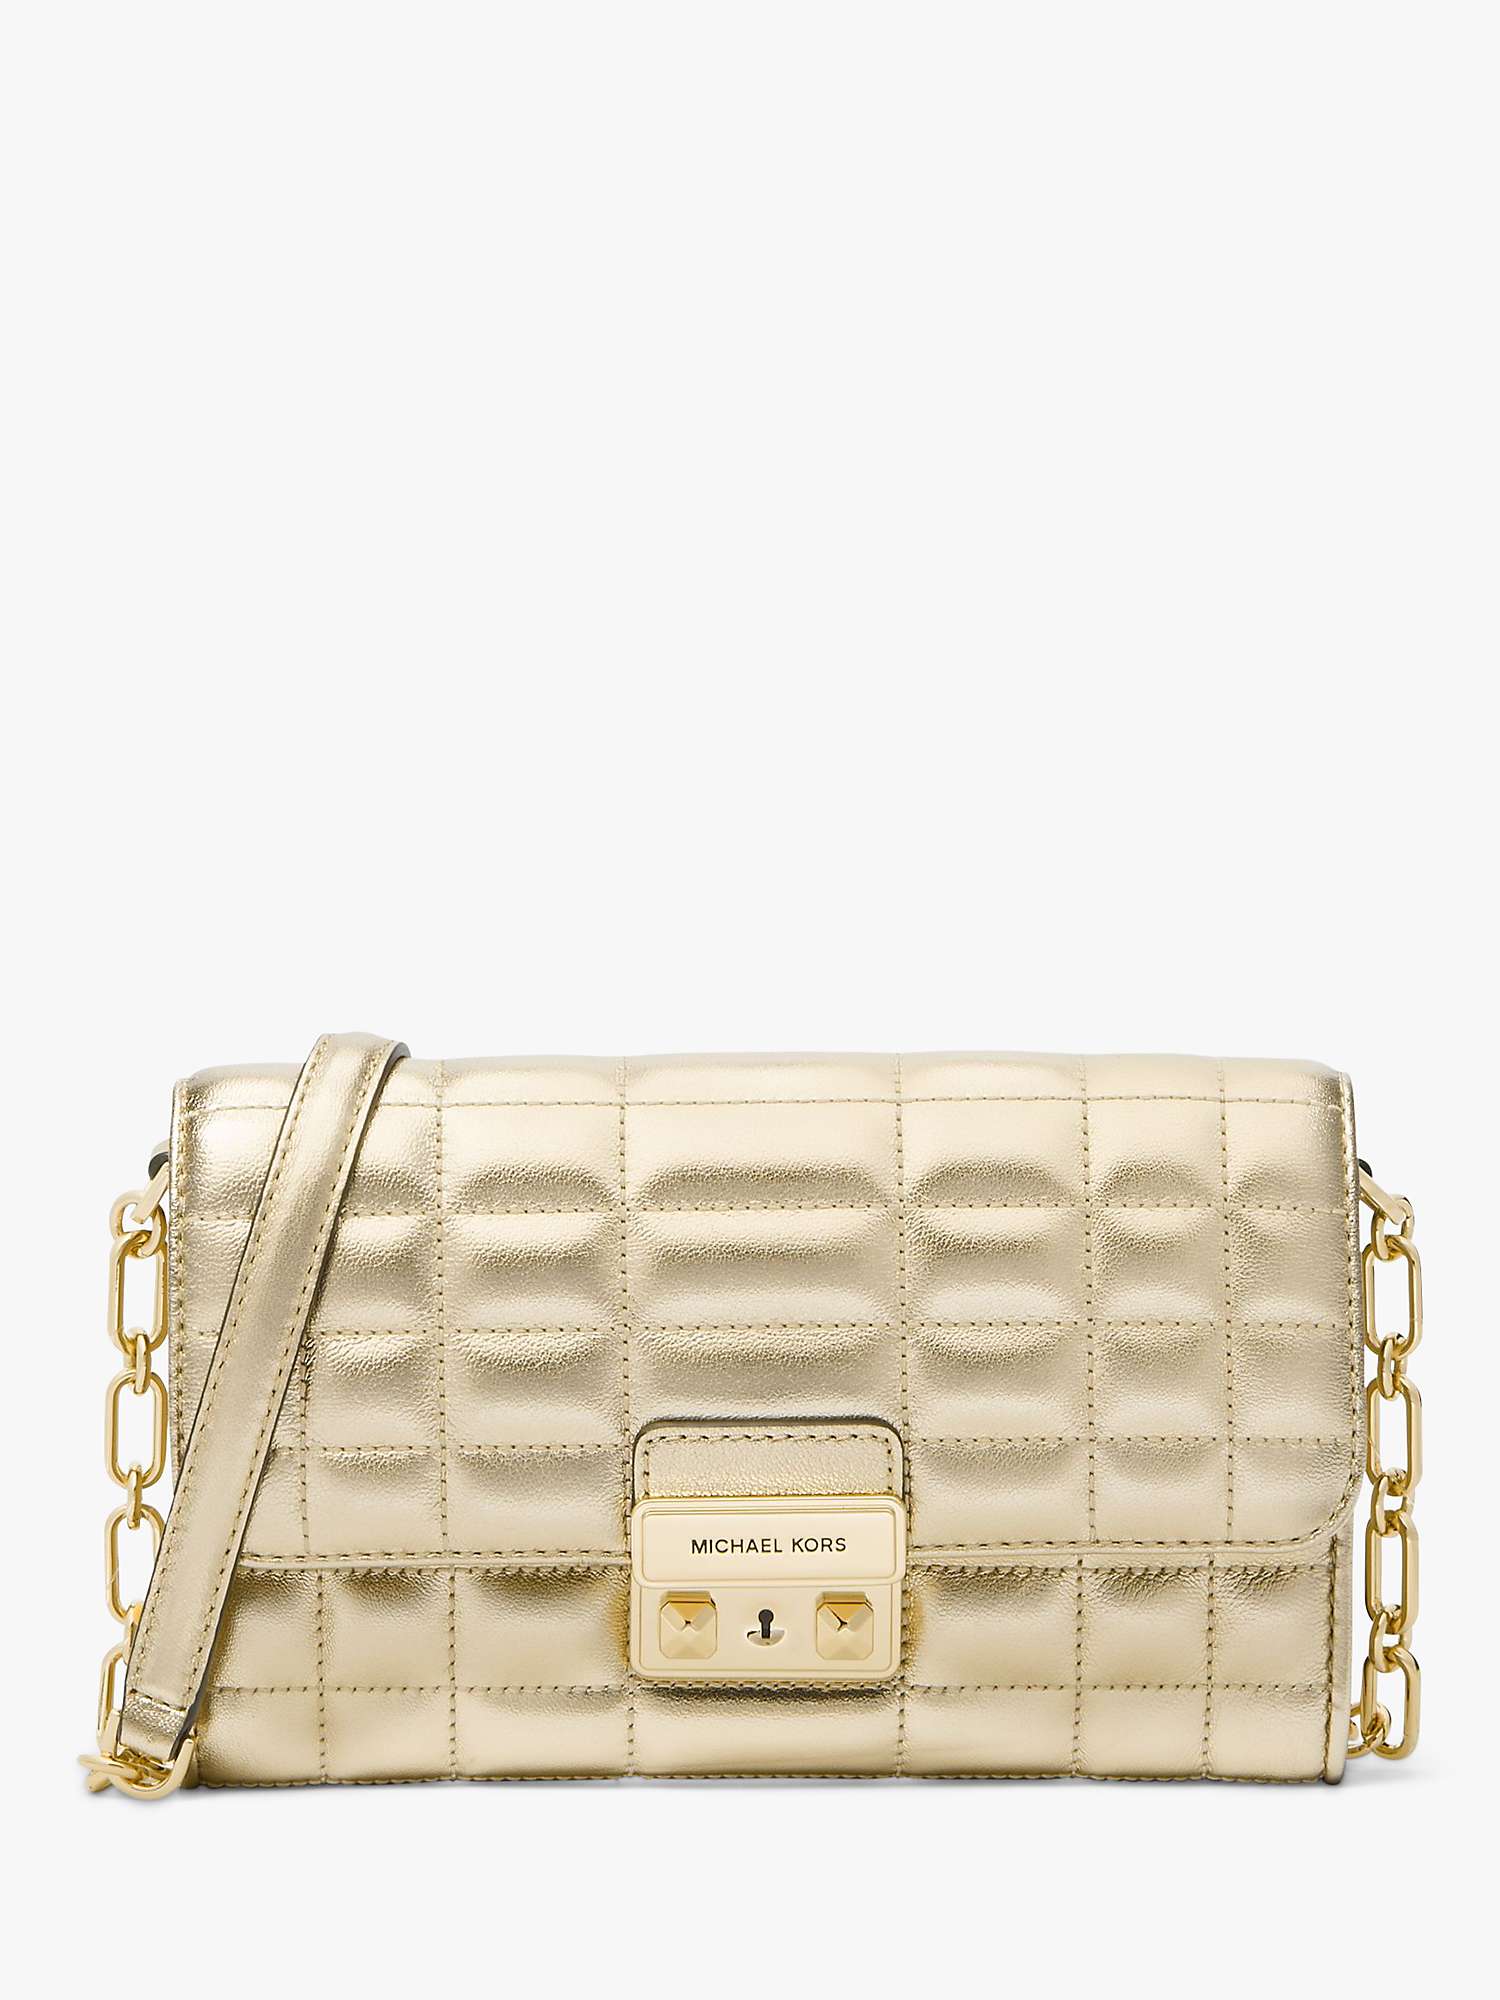 Buy Michael Kors Tribeca Quilted Leather Wallet on a Chain Online at johnlewis.com